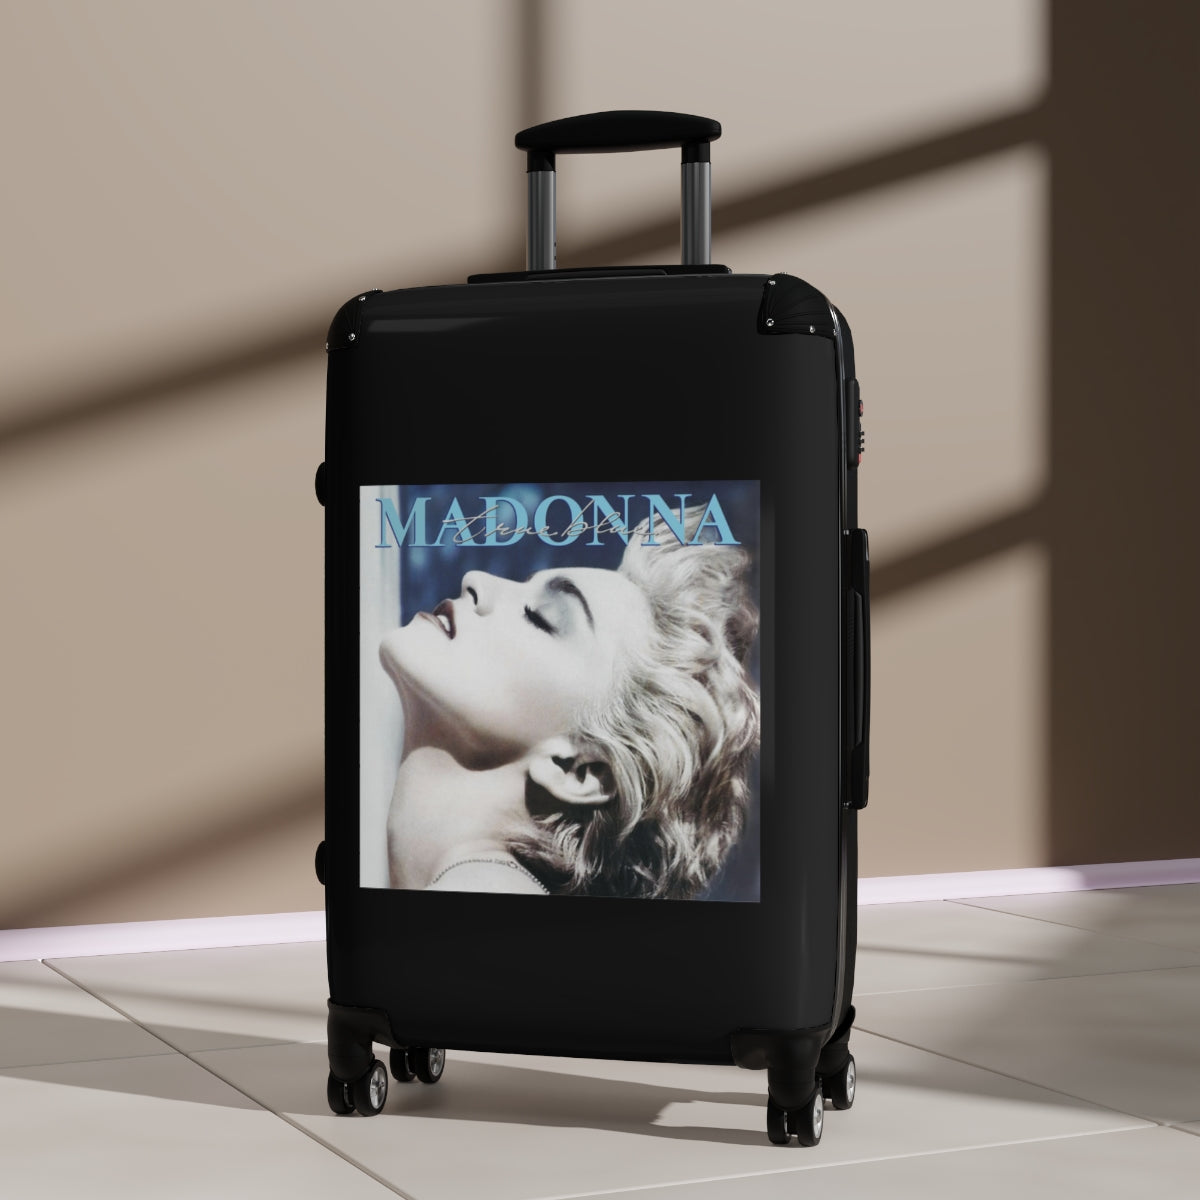 Getrott Madonna True Blue 1986 Black Cabin Suitcase Inner Pockets Extended Storage Adjustable Telescopic Handle Inner Pockets Double wheeled Polycarbonate Hard-shell Built-in Lock